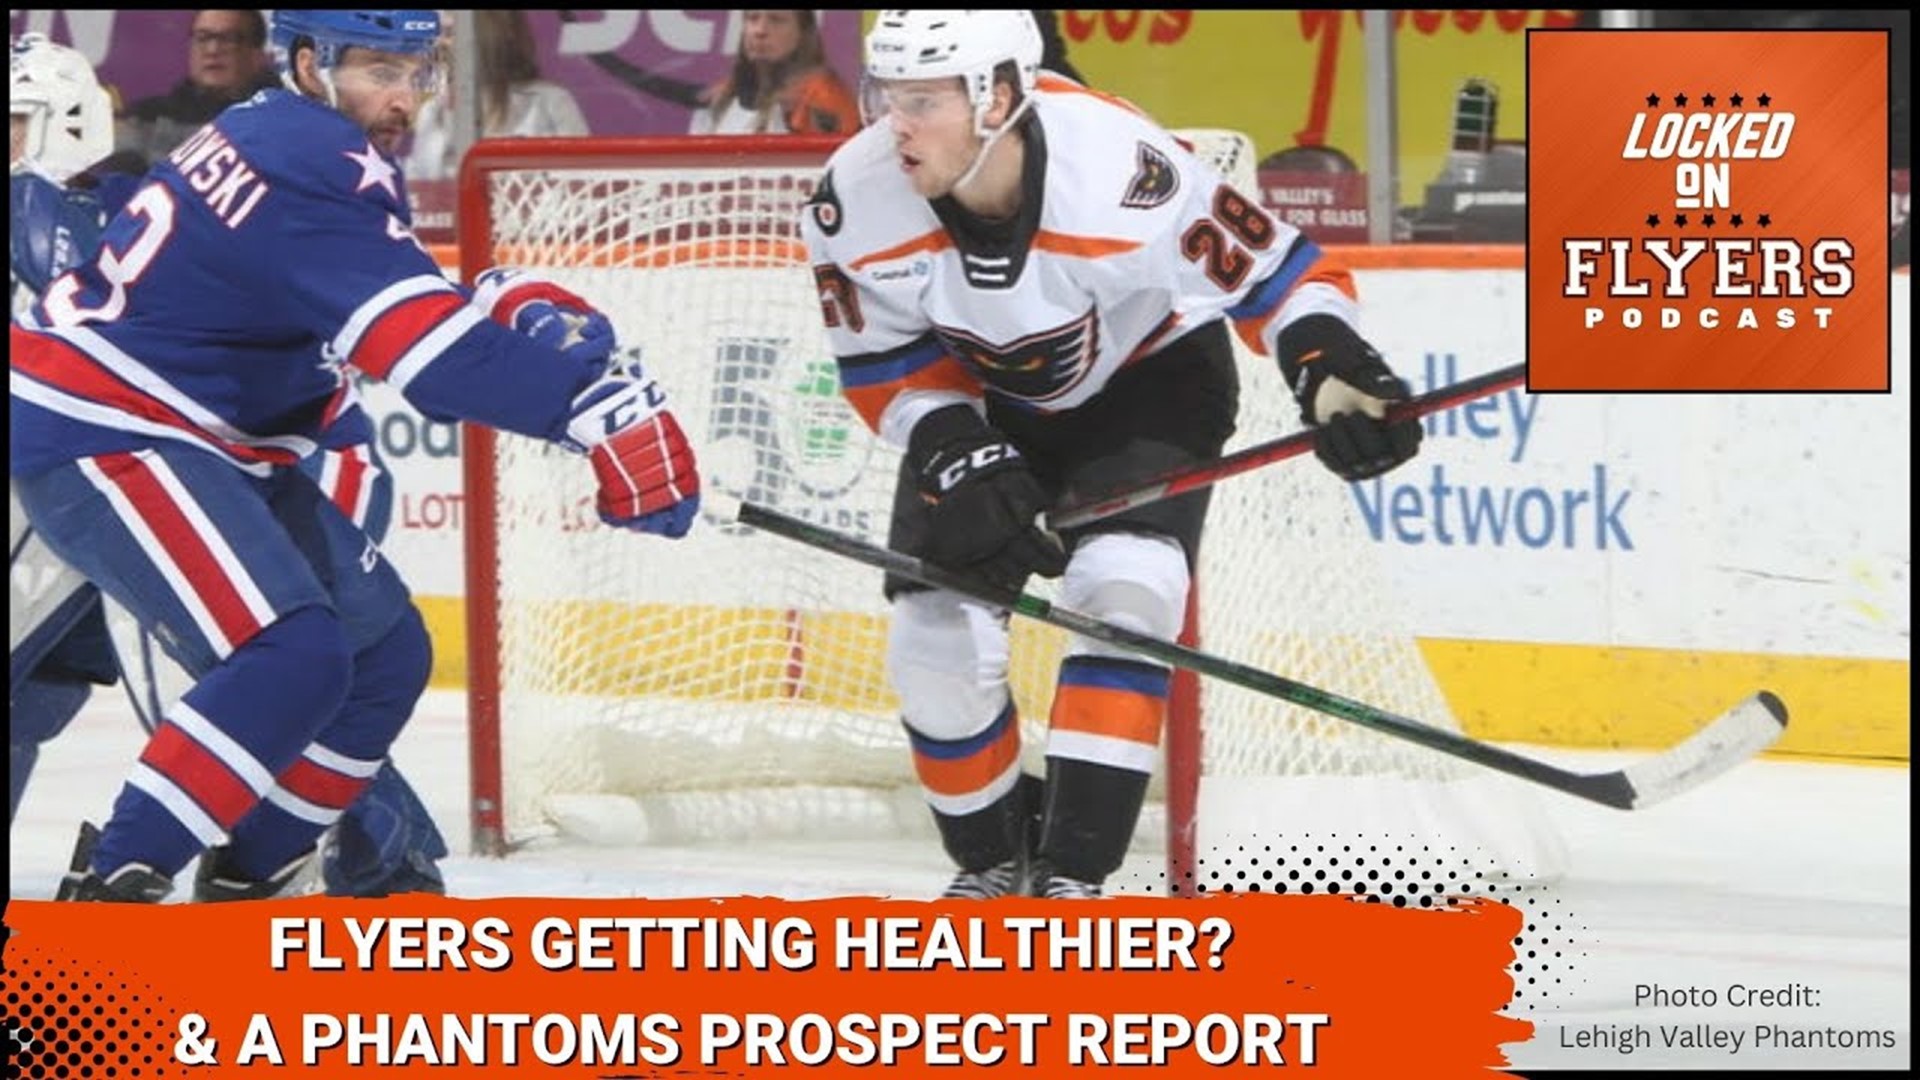 Russ & Rachel discuss the more good news than bad on the injury front. Cam Atkinson might be back soon, Travis Konecny is on IR, and Scott Laughton is skating again.